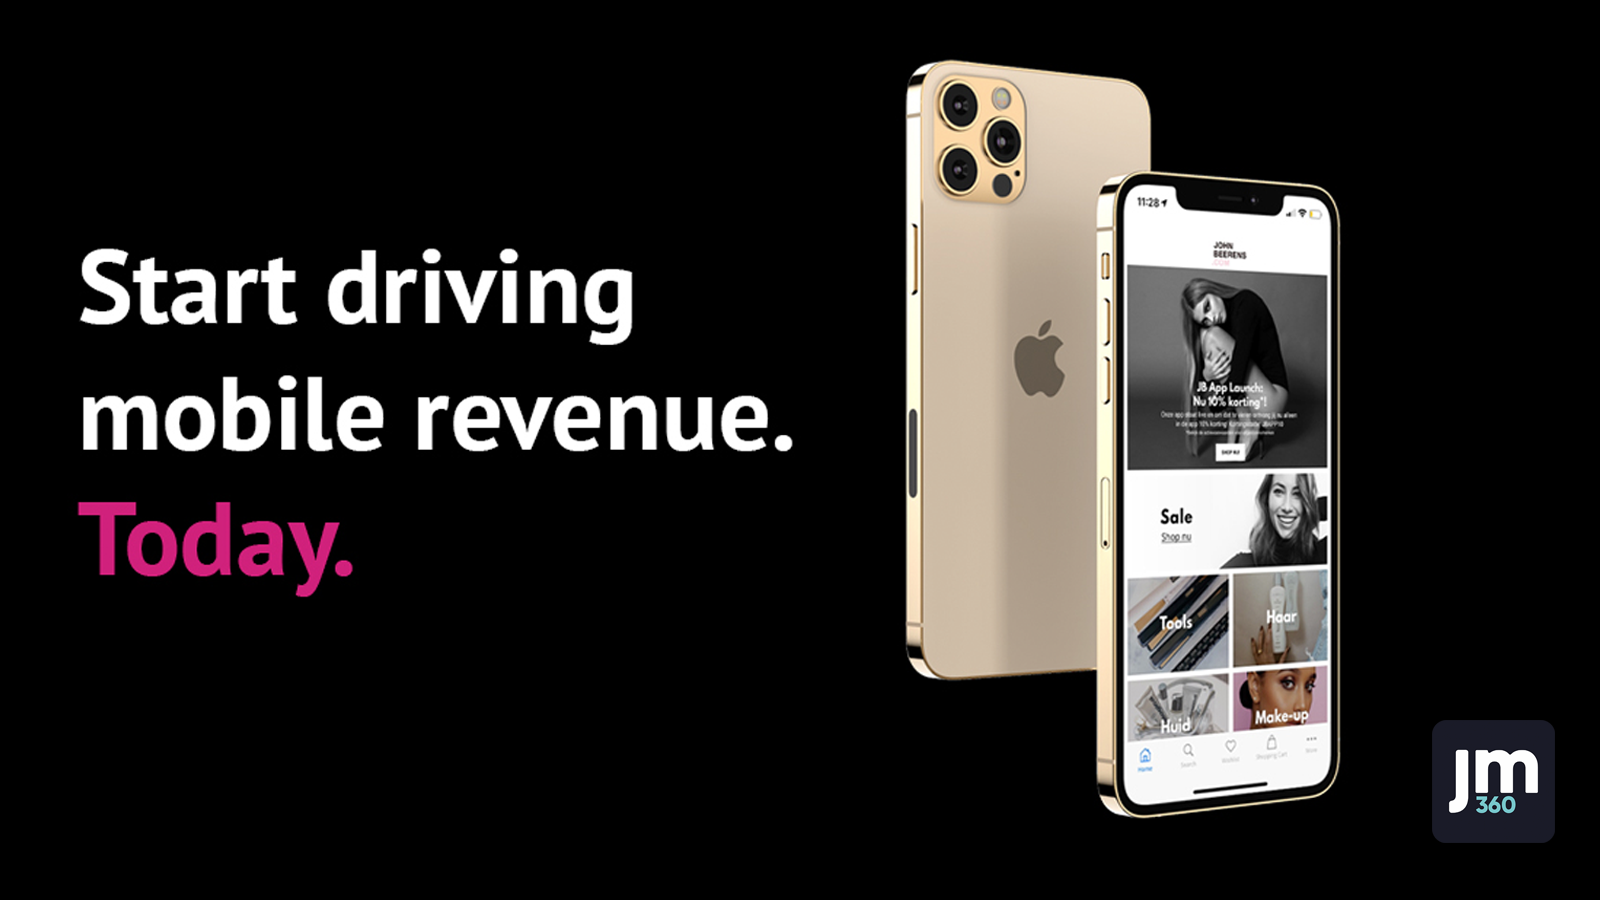 Start driving mobile revenue. Today.